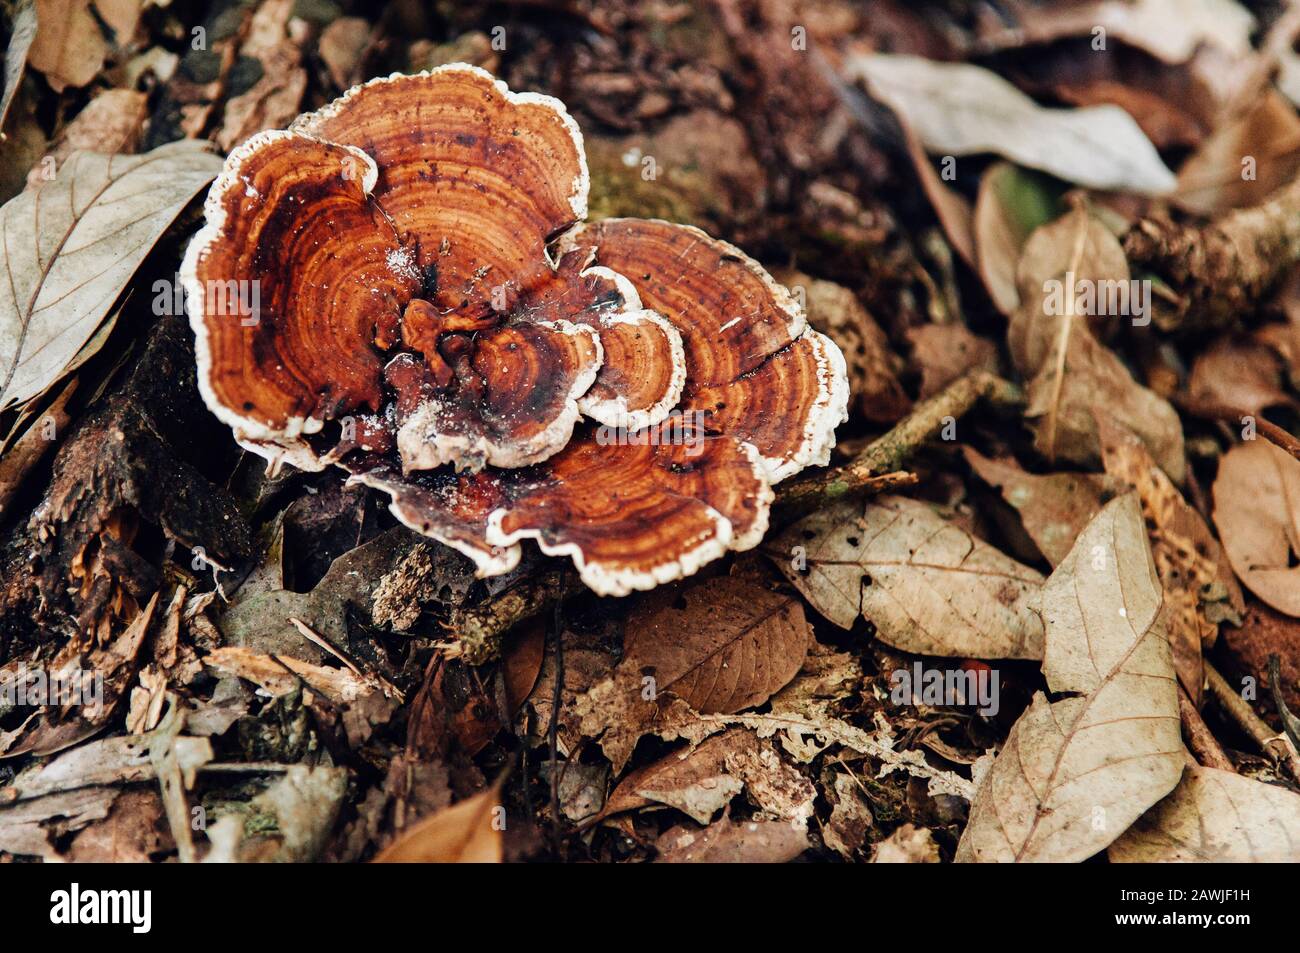 Ganoderma Iucidum or Lingzhi mushroom fungi in natural forest on ground with dried leaves close up detail Stock Photo